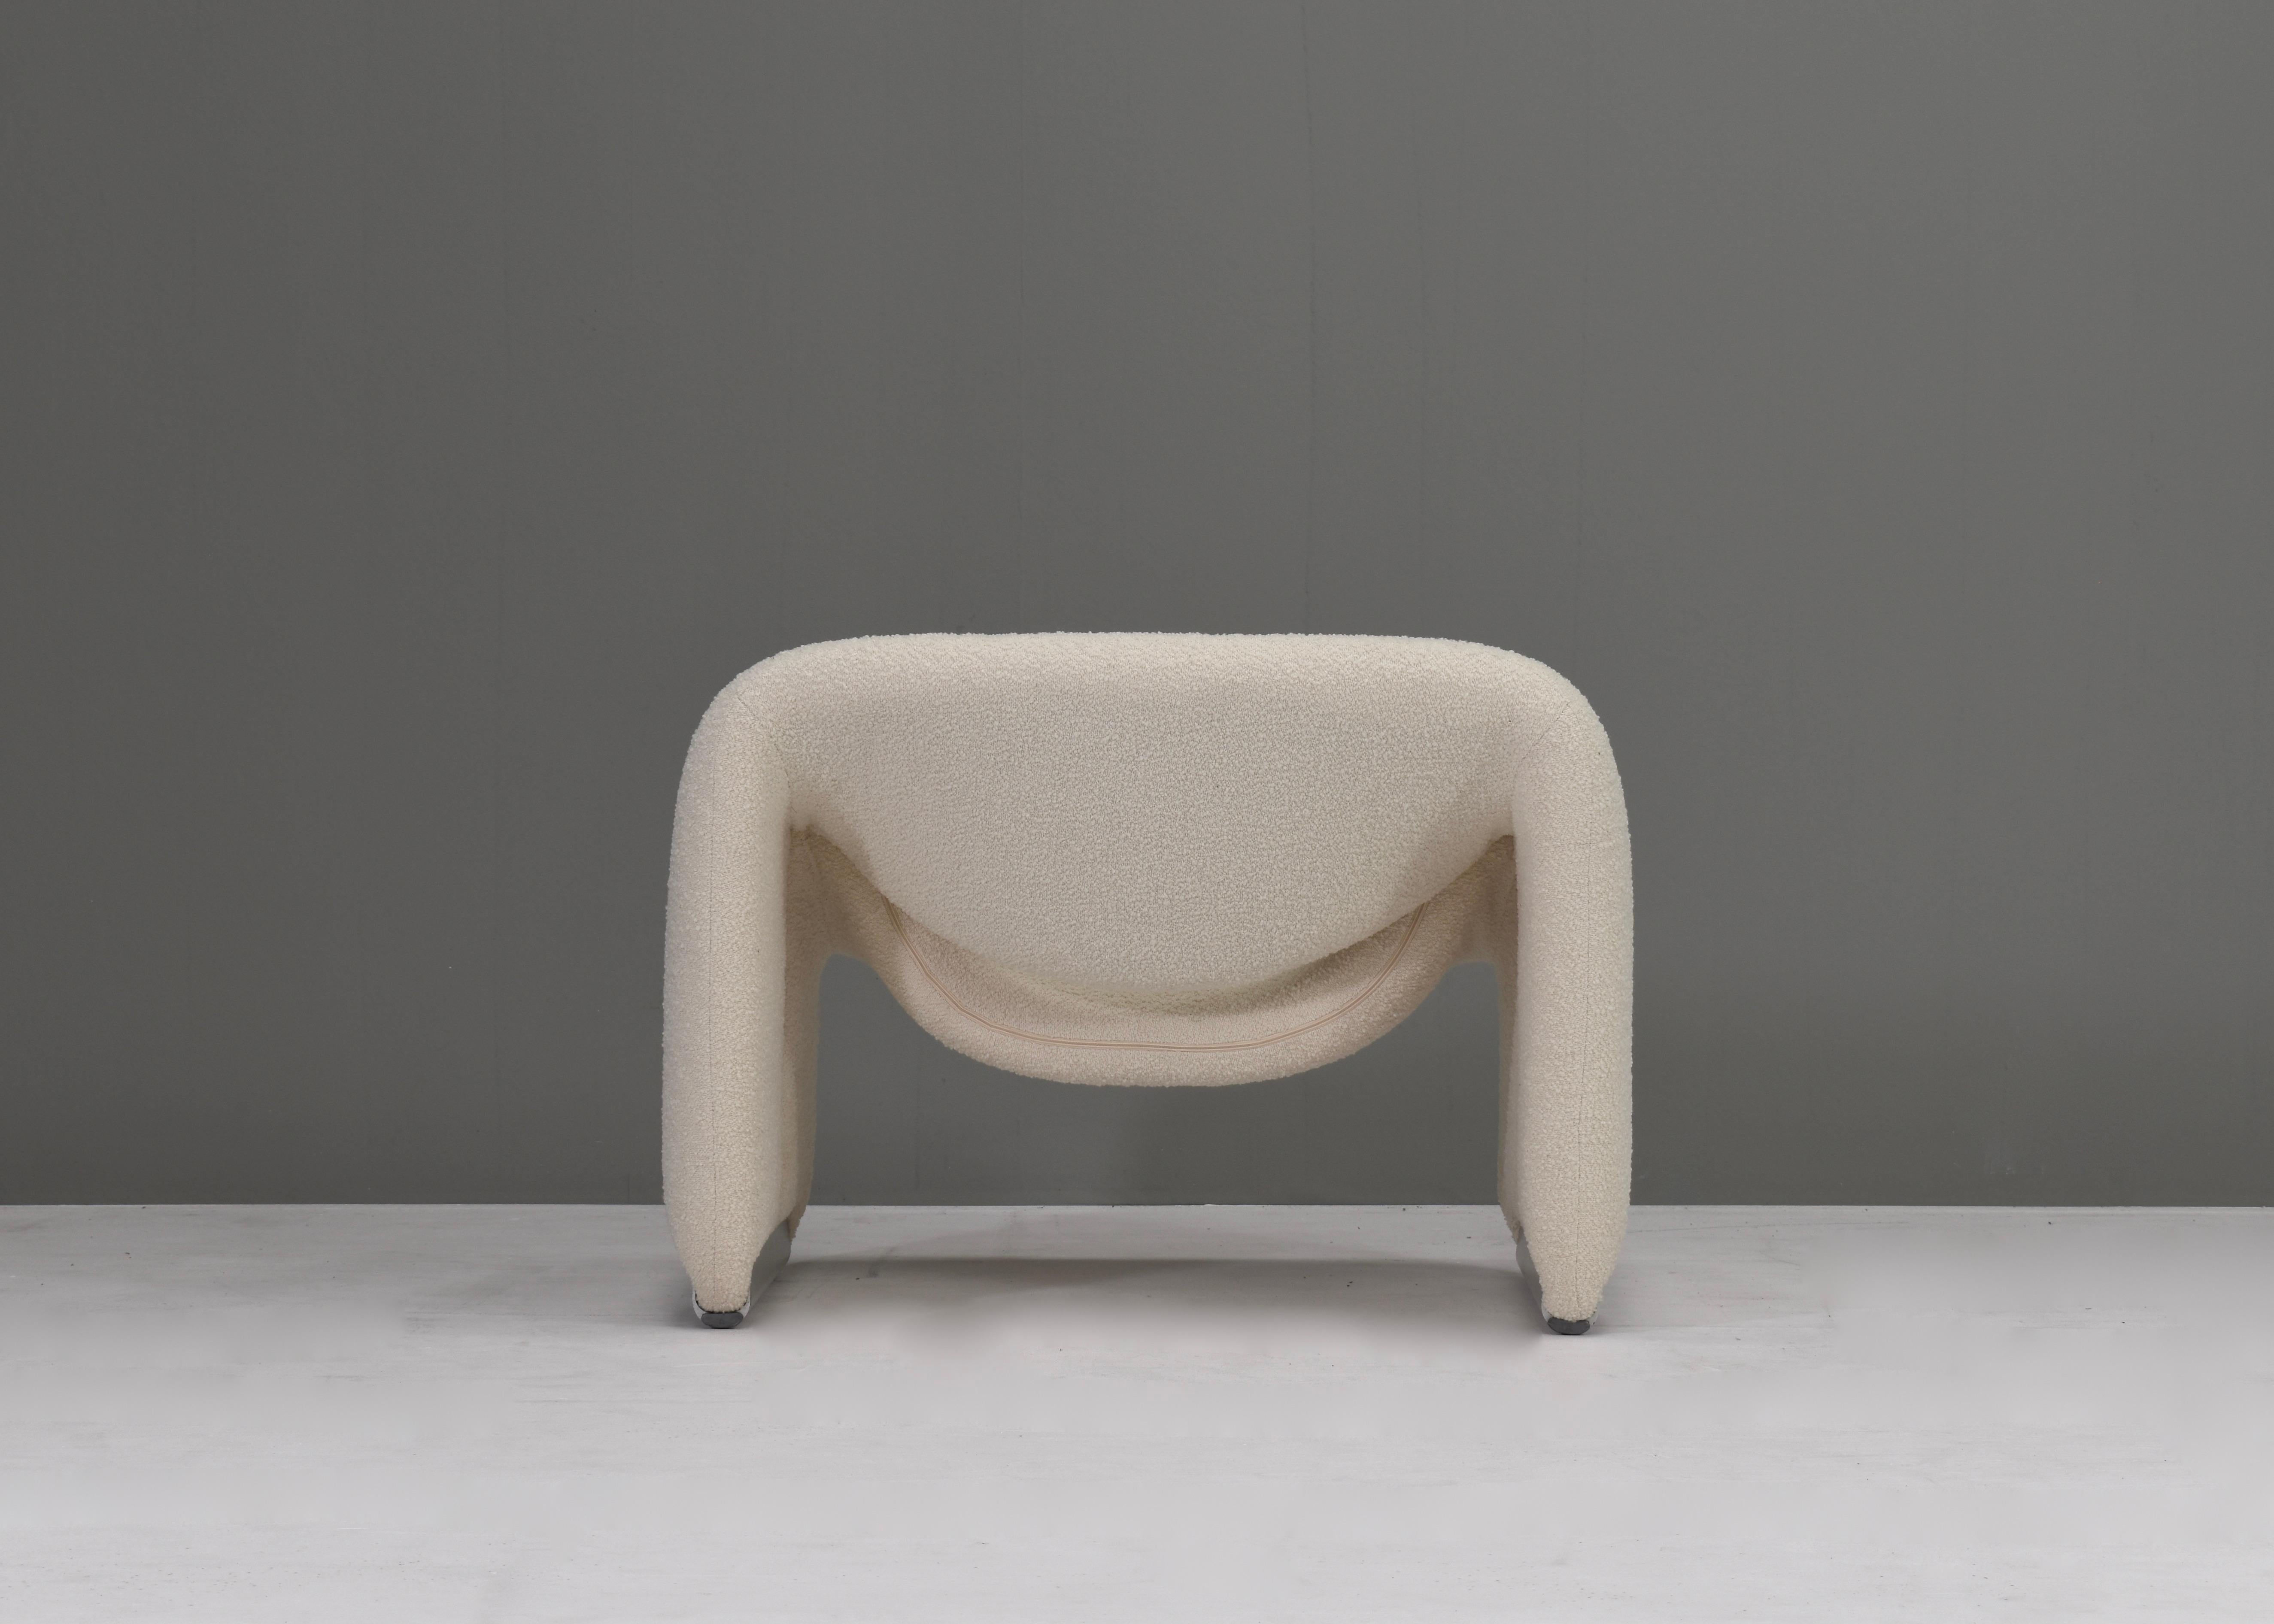 Late 20th Century Pierre Paulin F598 Groovy Armchair for Artifort New Upholstery Netherlands, 1972 For Sale